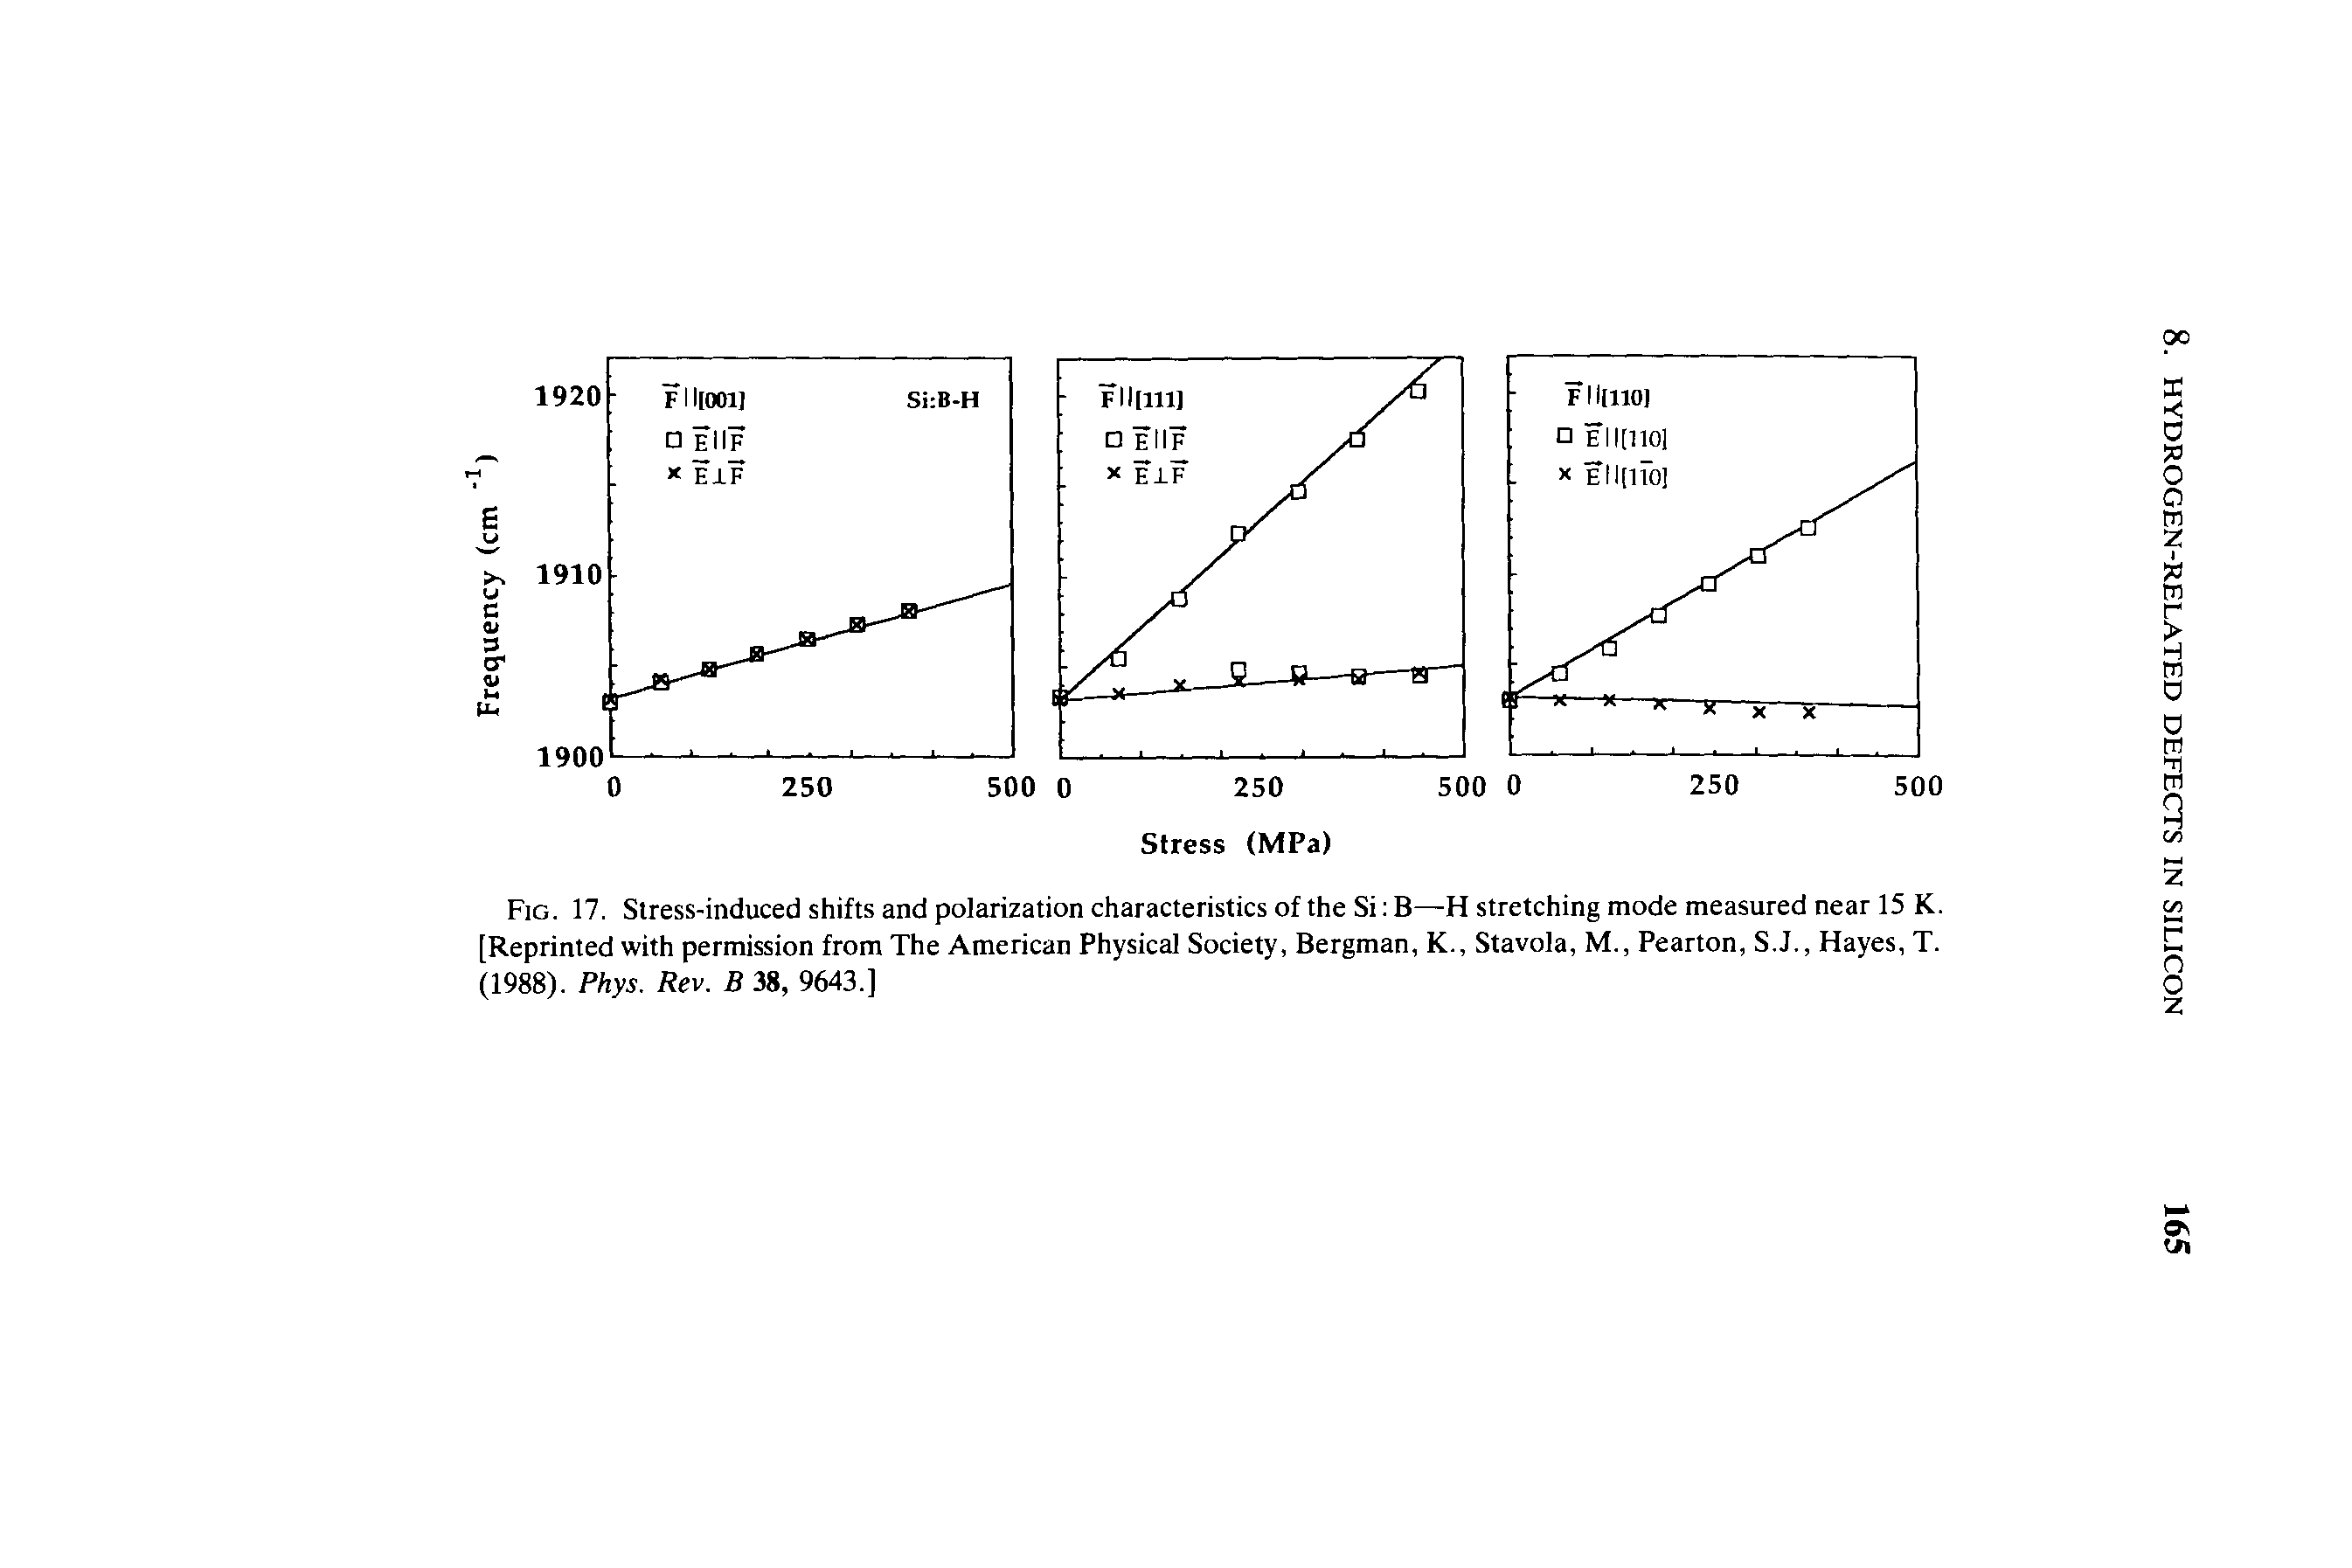 Fig. 17. Stress-induced shifts and polarization characteristics of the Si B—H stretching mode measured near 15 K. [Reprinted with permission from The American Physical Society, Bergman, K., Stavola, M., Pearton, S.J., Hayes, T. (1988). Phys. Rev. B 38, 9643.]...